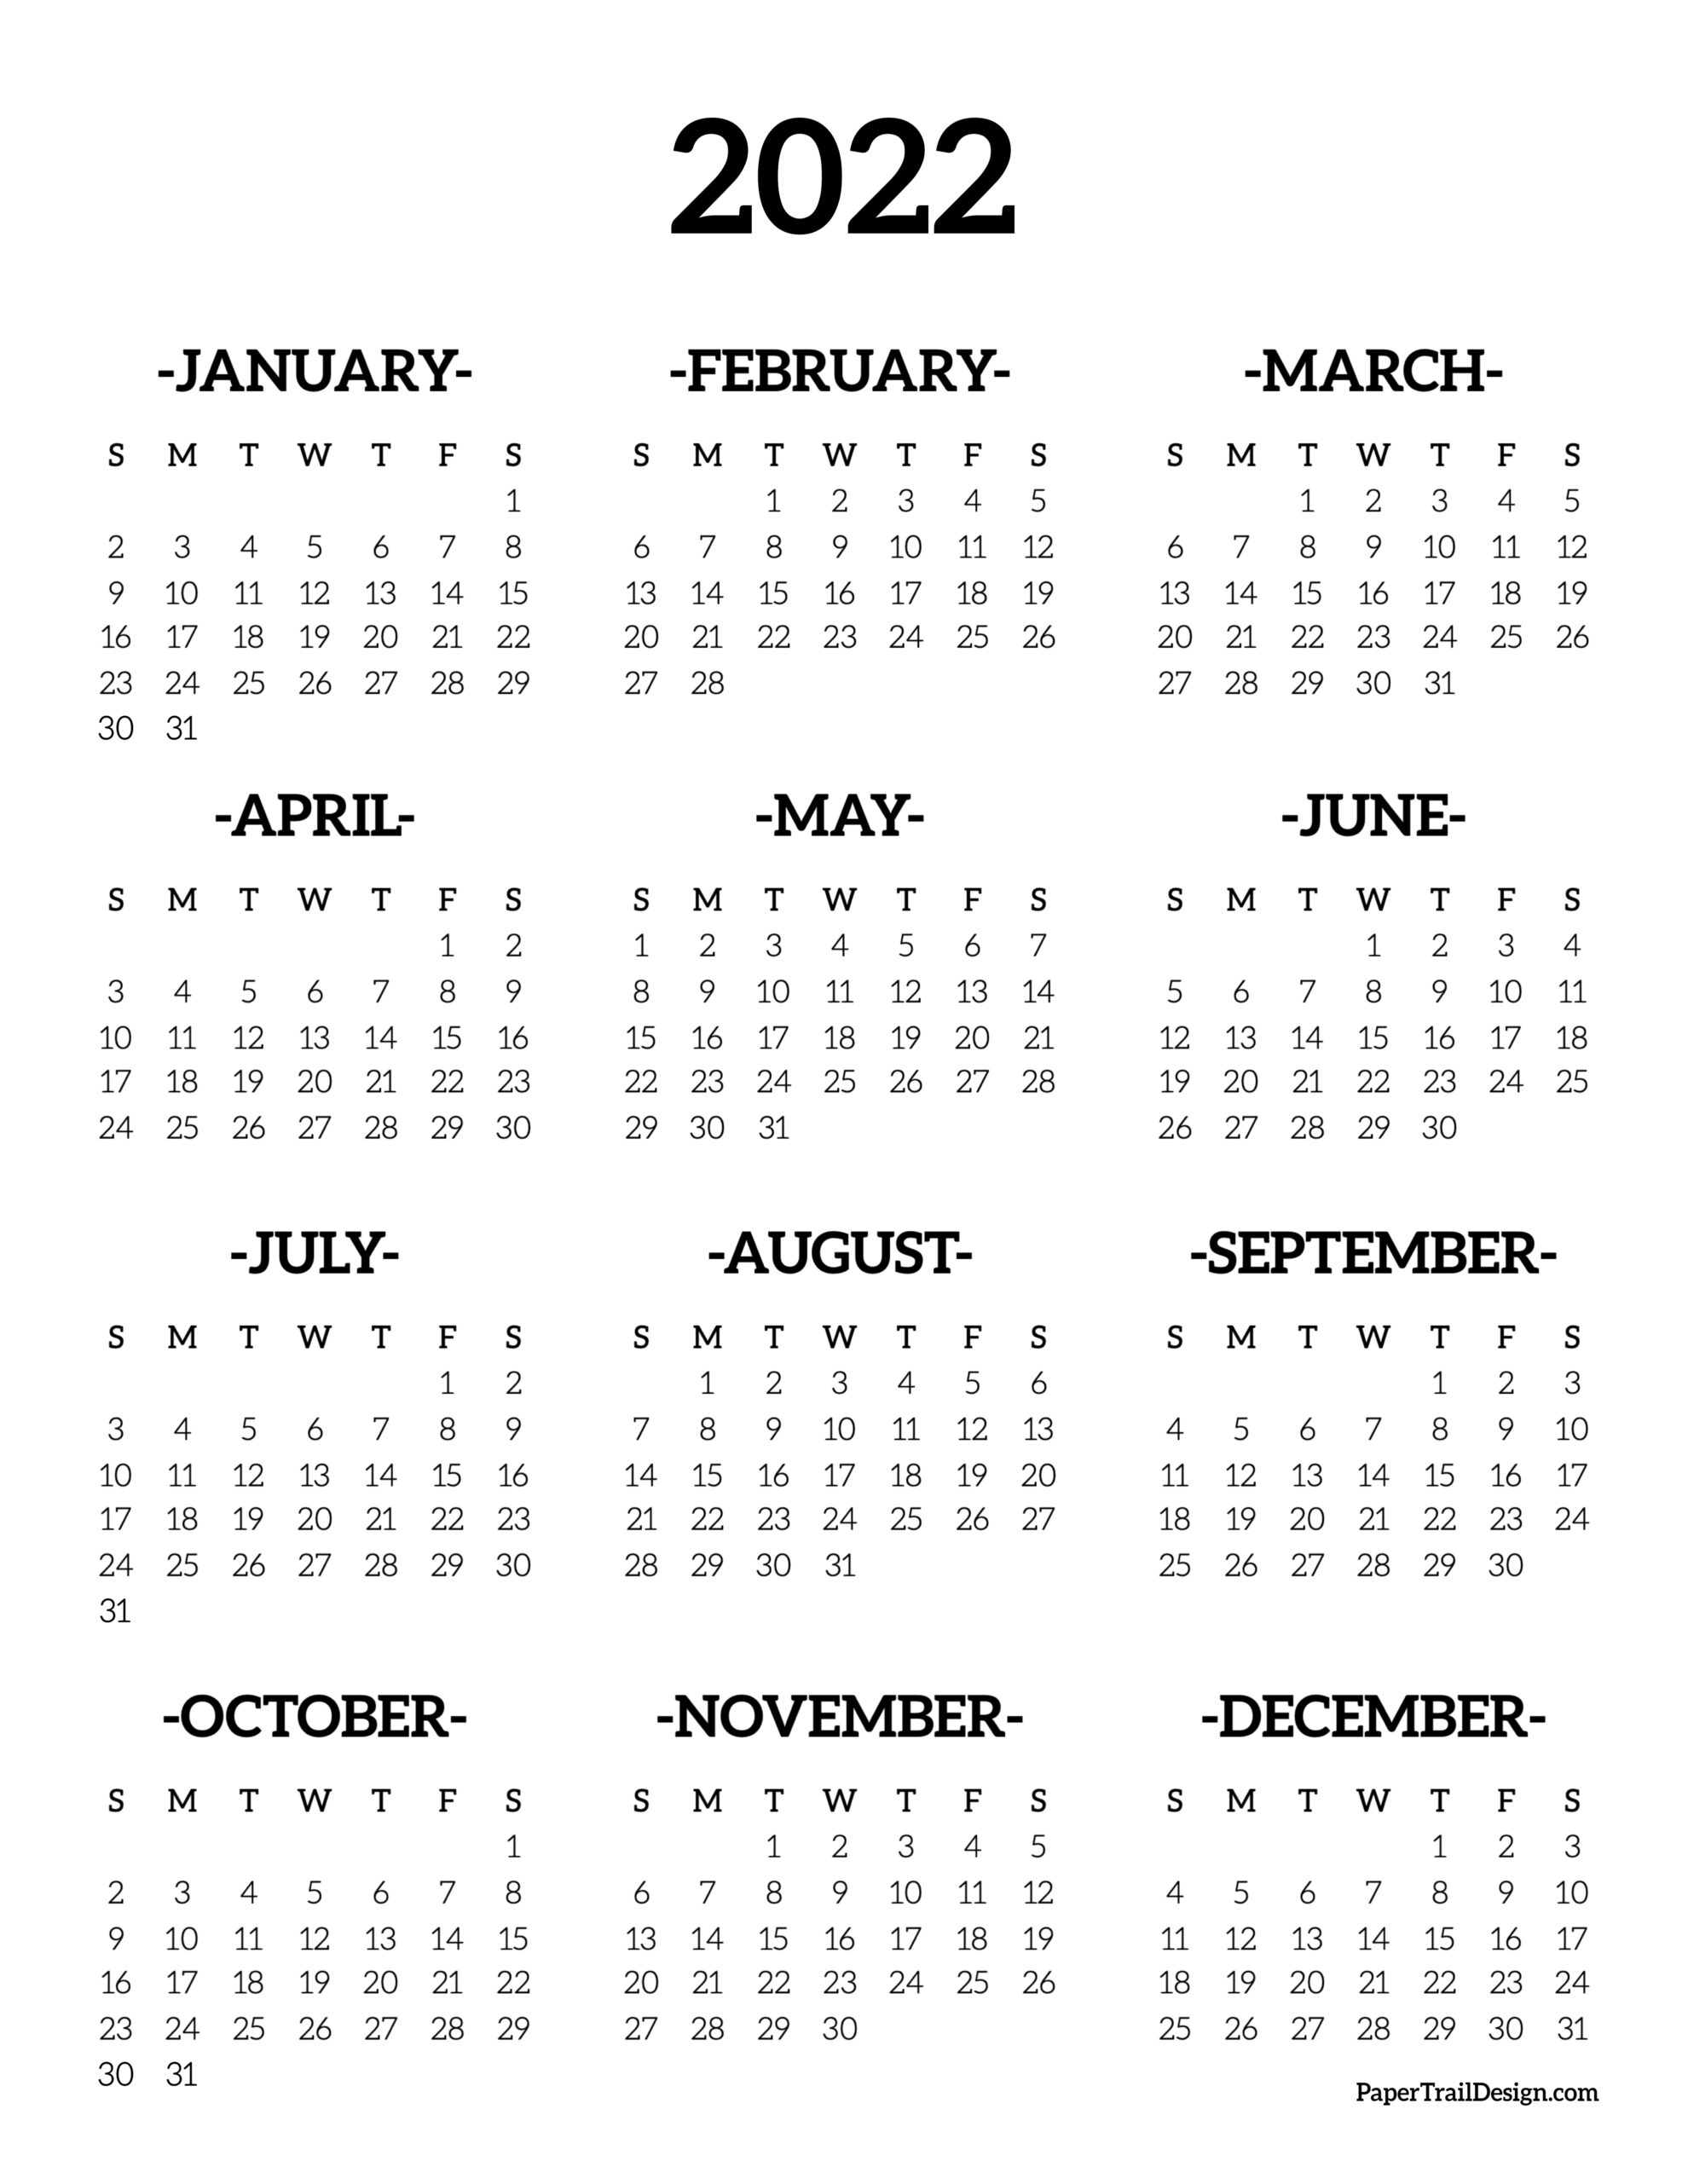 Free 2022 Calendar Mailed To You Calendar 2022 Printable One Page - Paper Trail Design